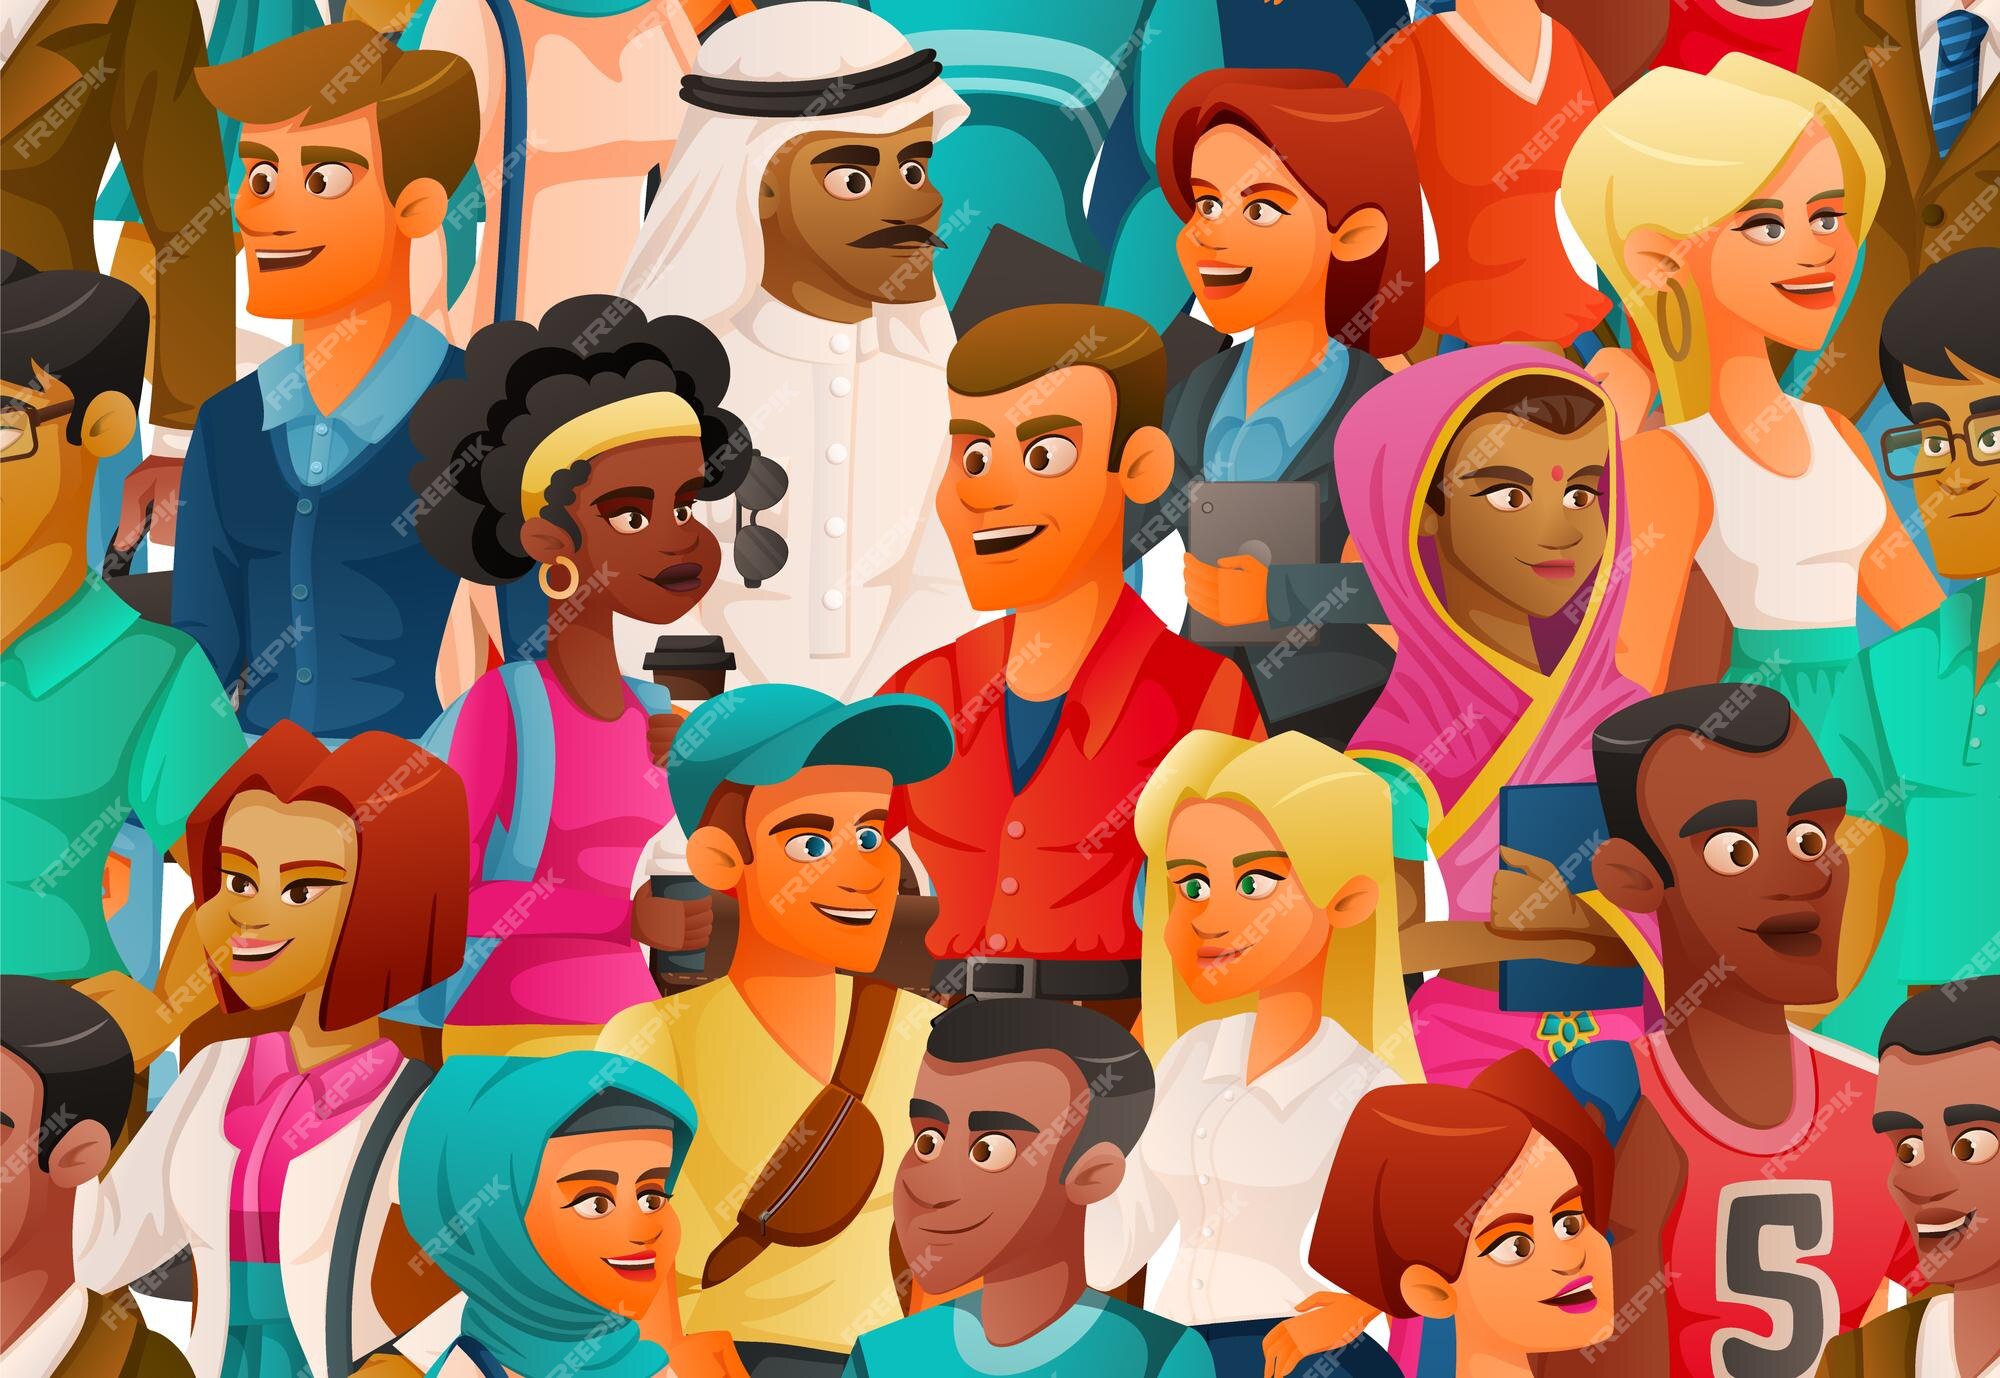 Premium Vector | Cartoon characters diversity composition with view of  crowd with young people of colour wearing different outfits vector  illustration